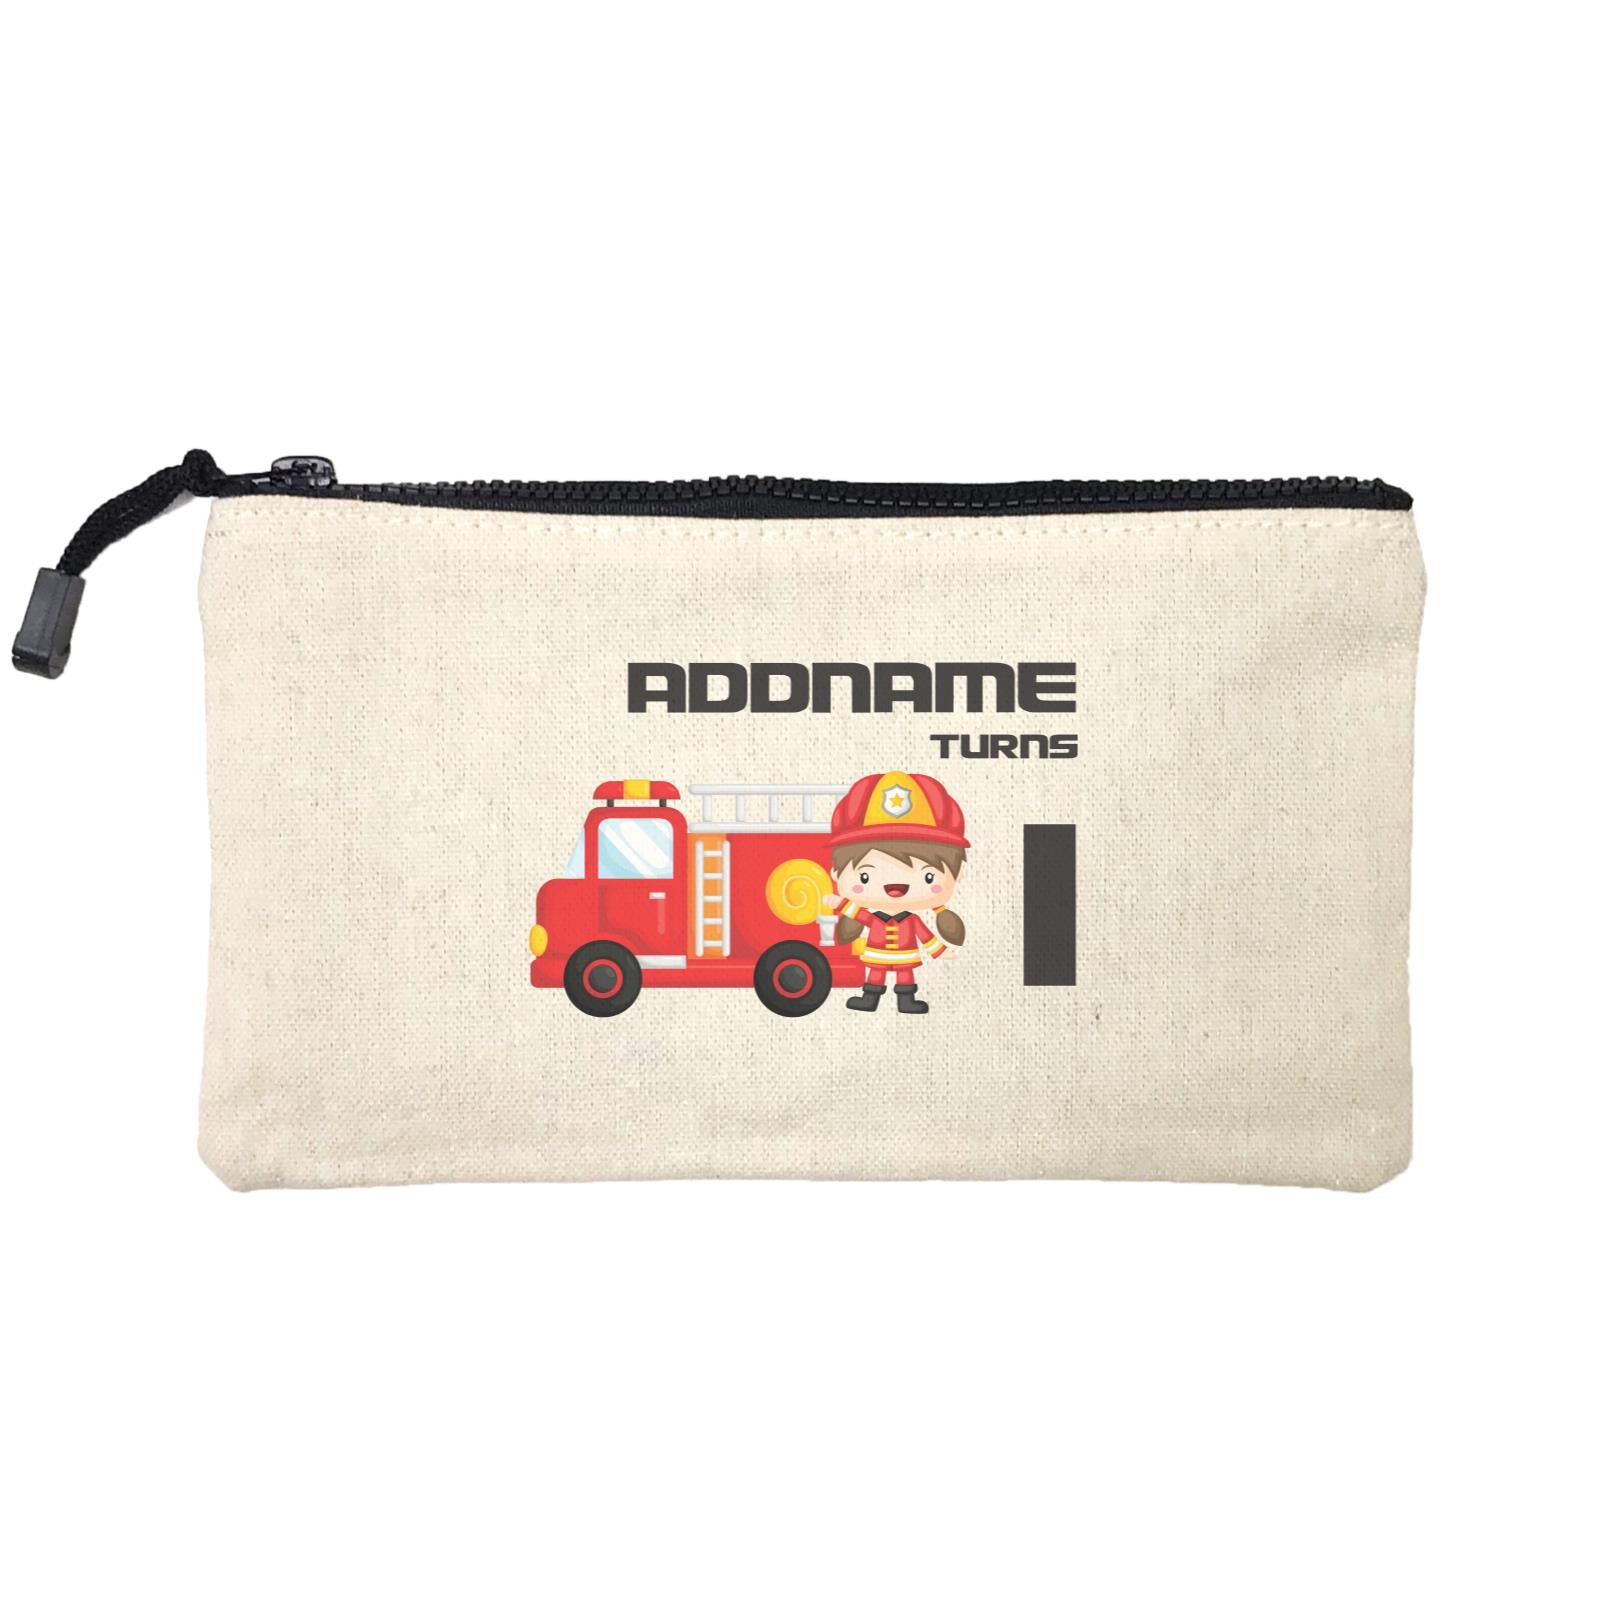 Birthday Firefighter Girl With Firetruck Addname Turns 1 Mini Accessories Stationery Pouch